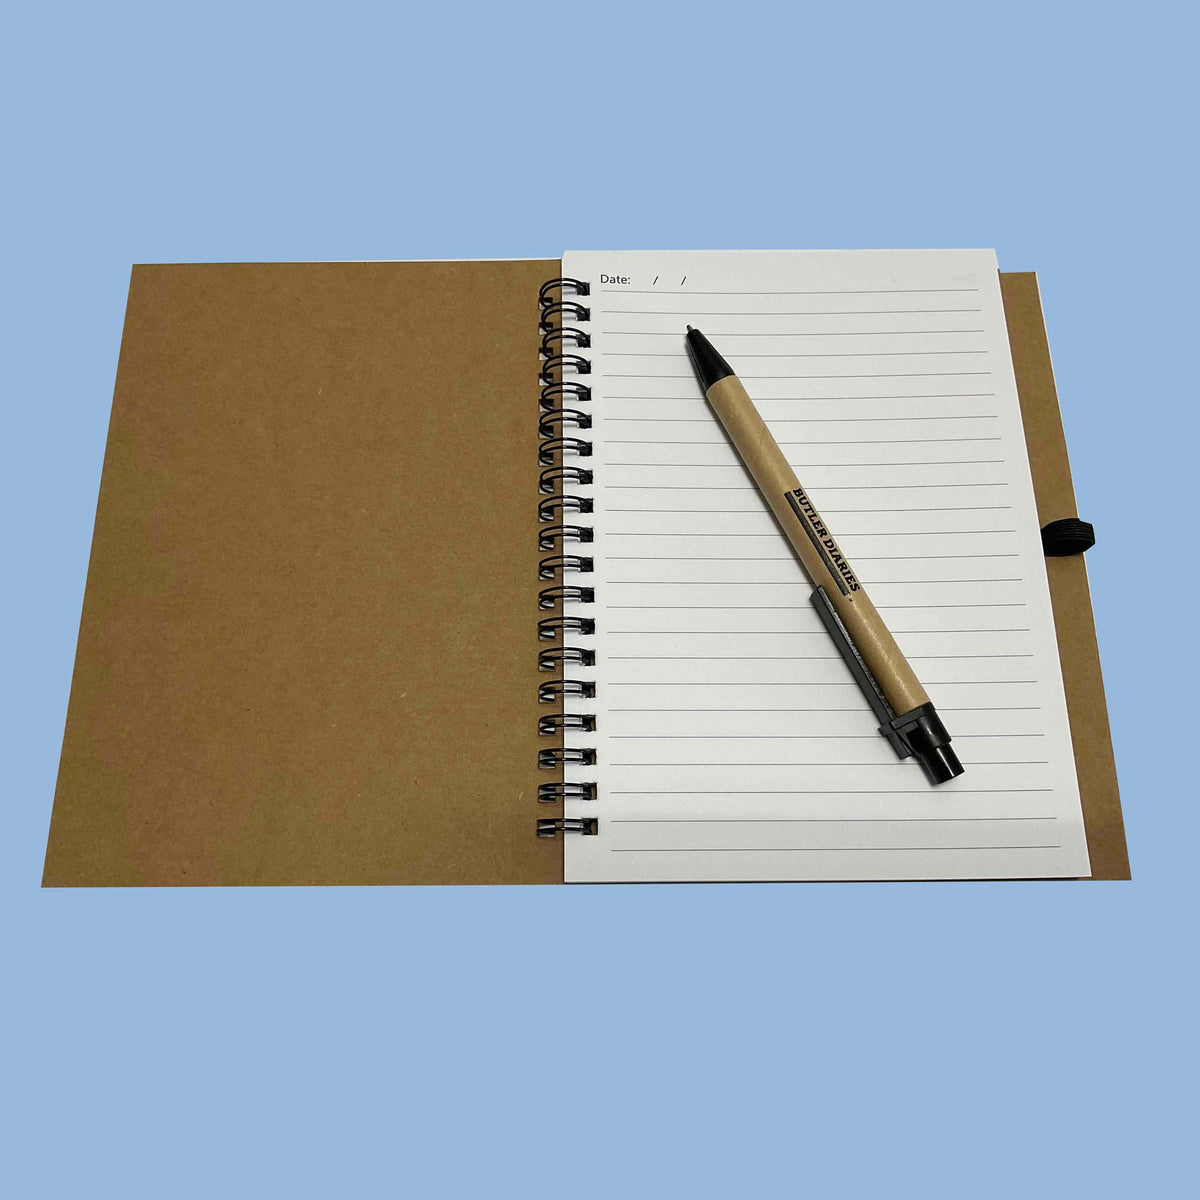 Jottings pad and pen